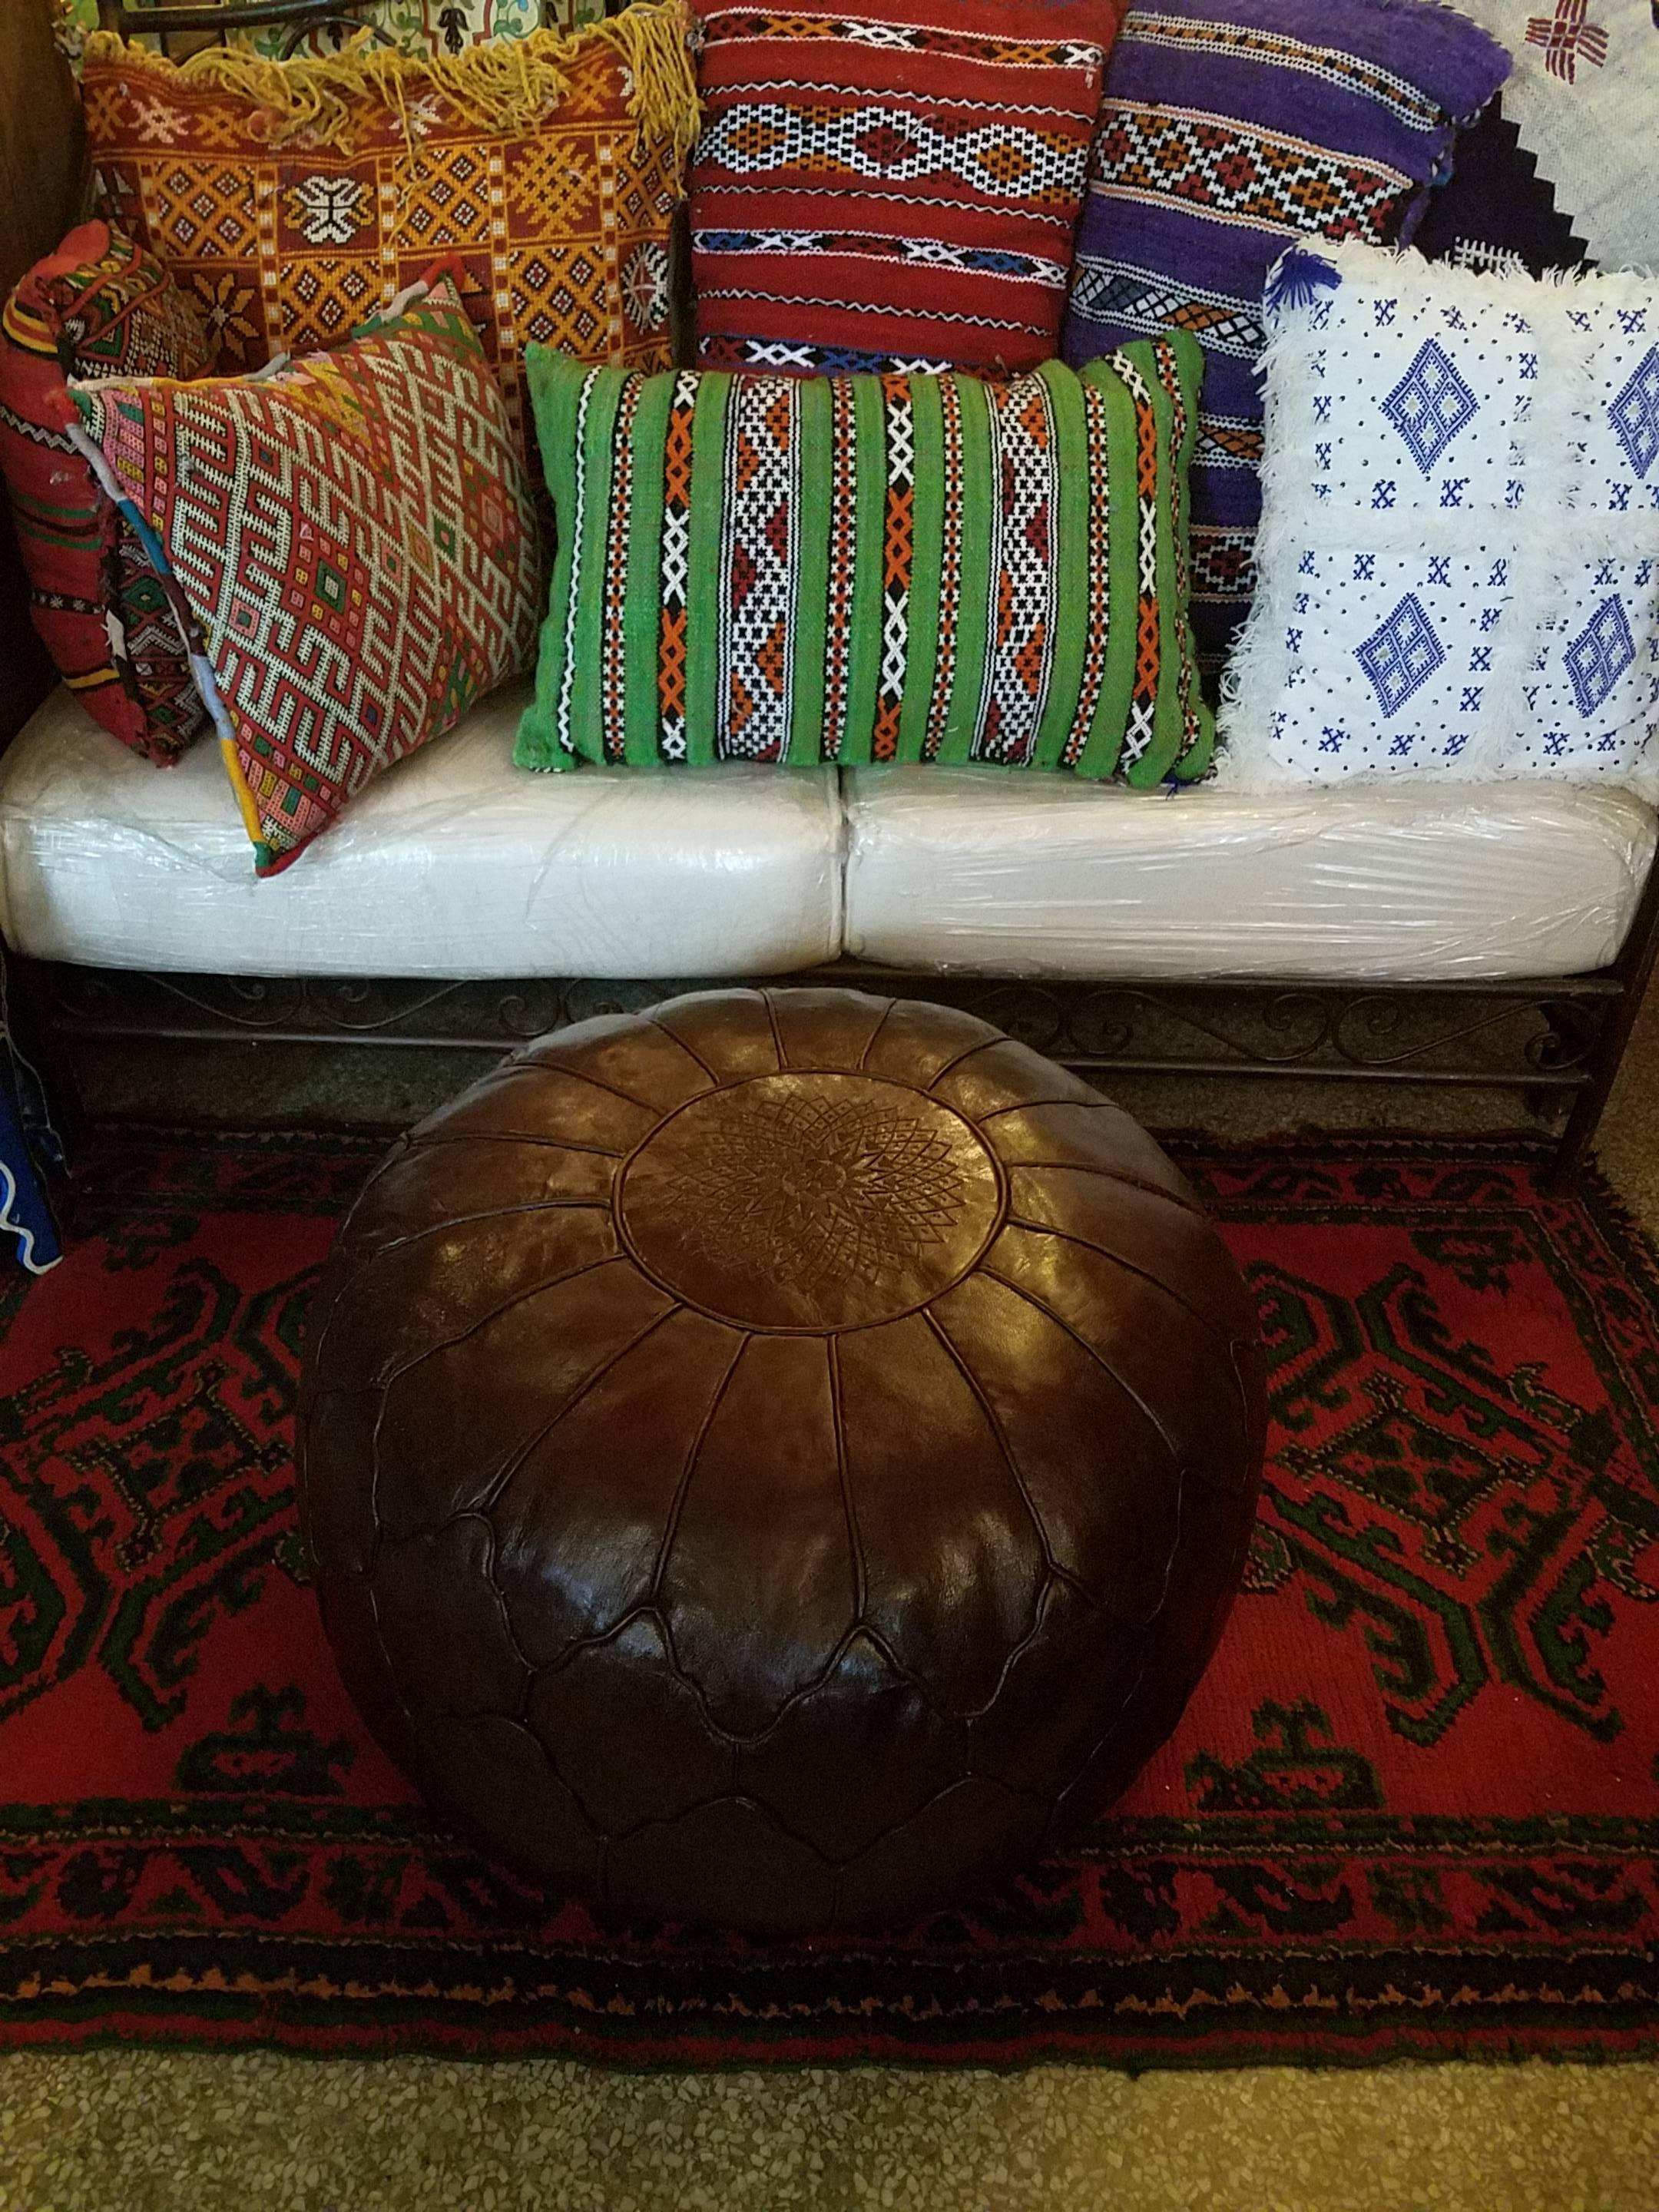 Poufs and ottomans have been around for a very long time, as many cultures prefer low seating for meals and family gatherings. We, at Living Morocco, carry a wide variety of leather poufs and ottomans, fabric hassocks and leather camel